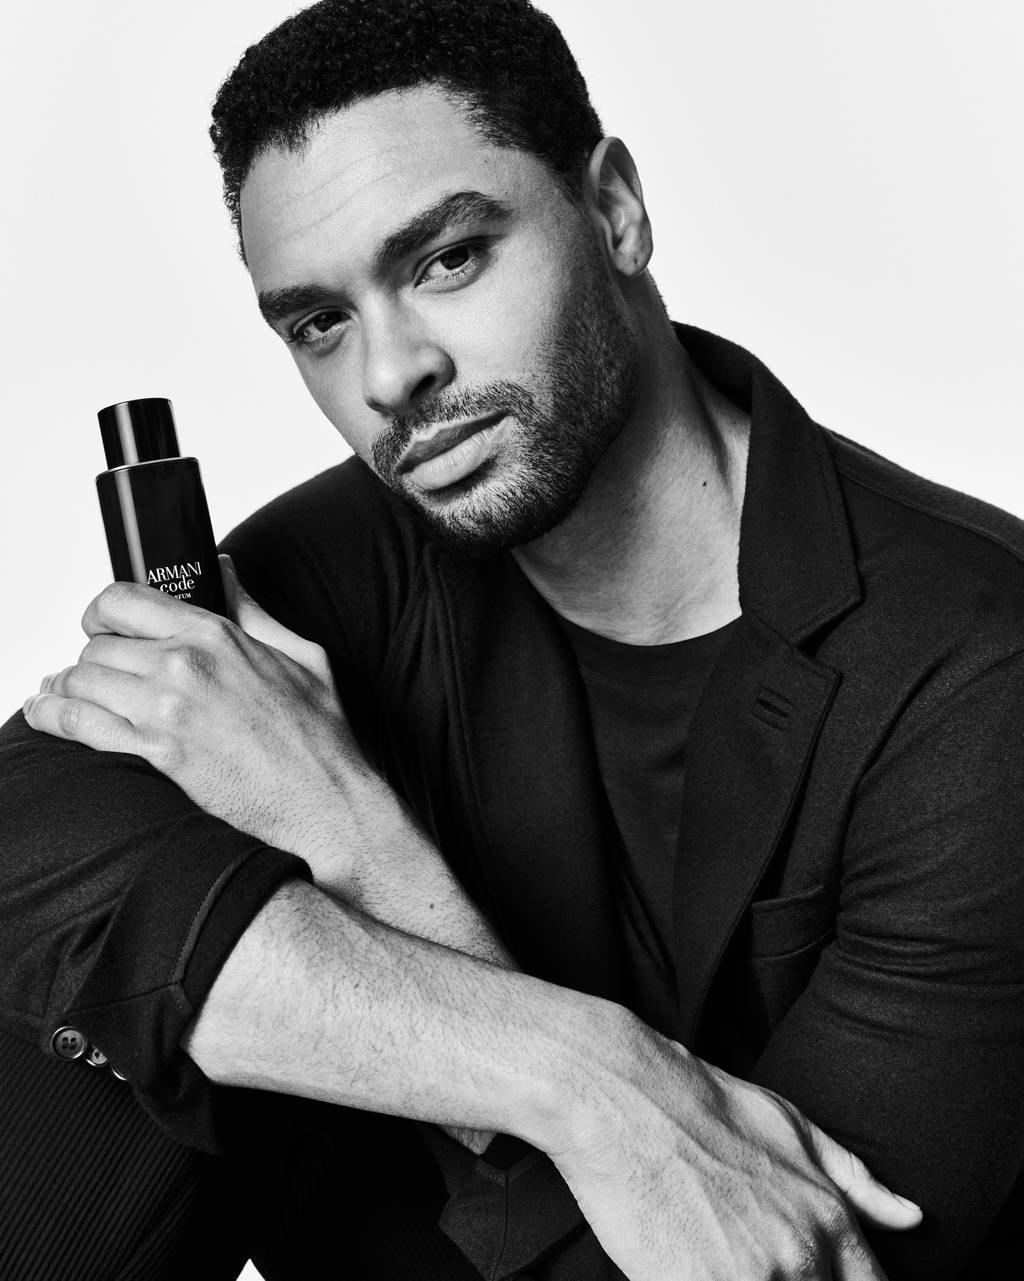 Armani tapped Regé-Jean Page to be the face of its Armani Code cologne.